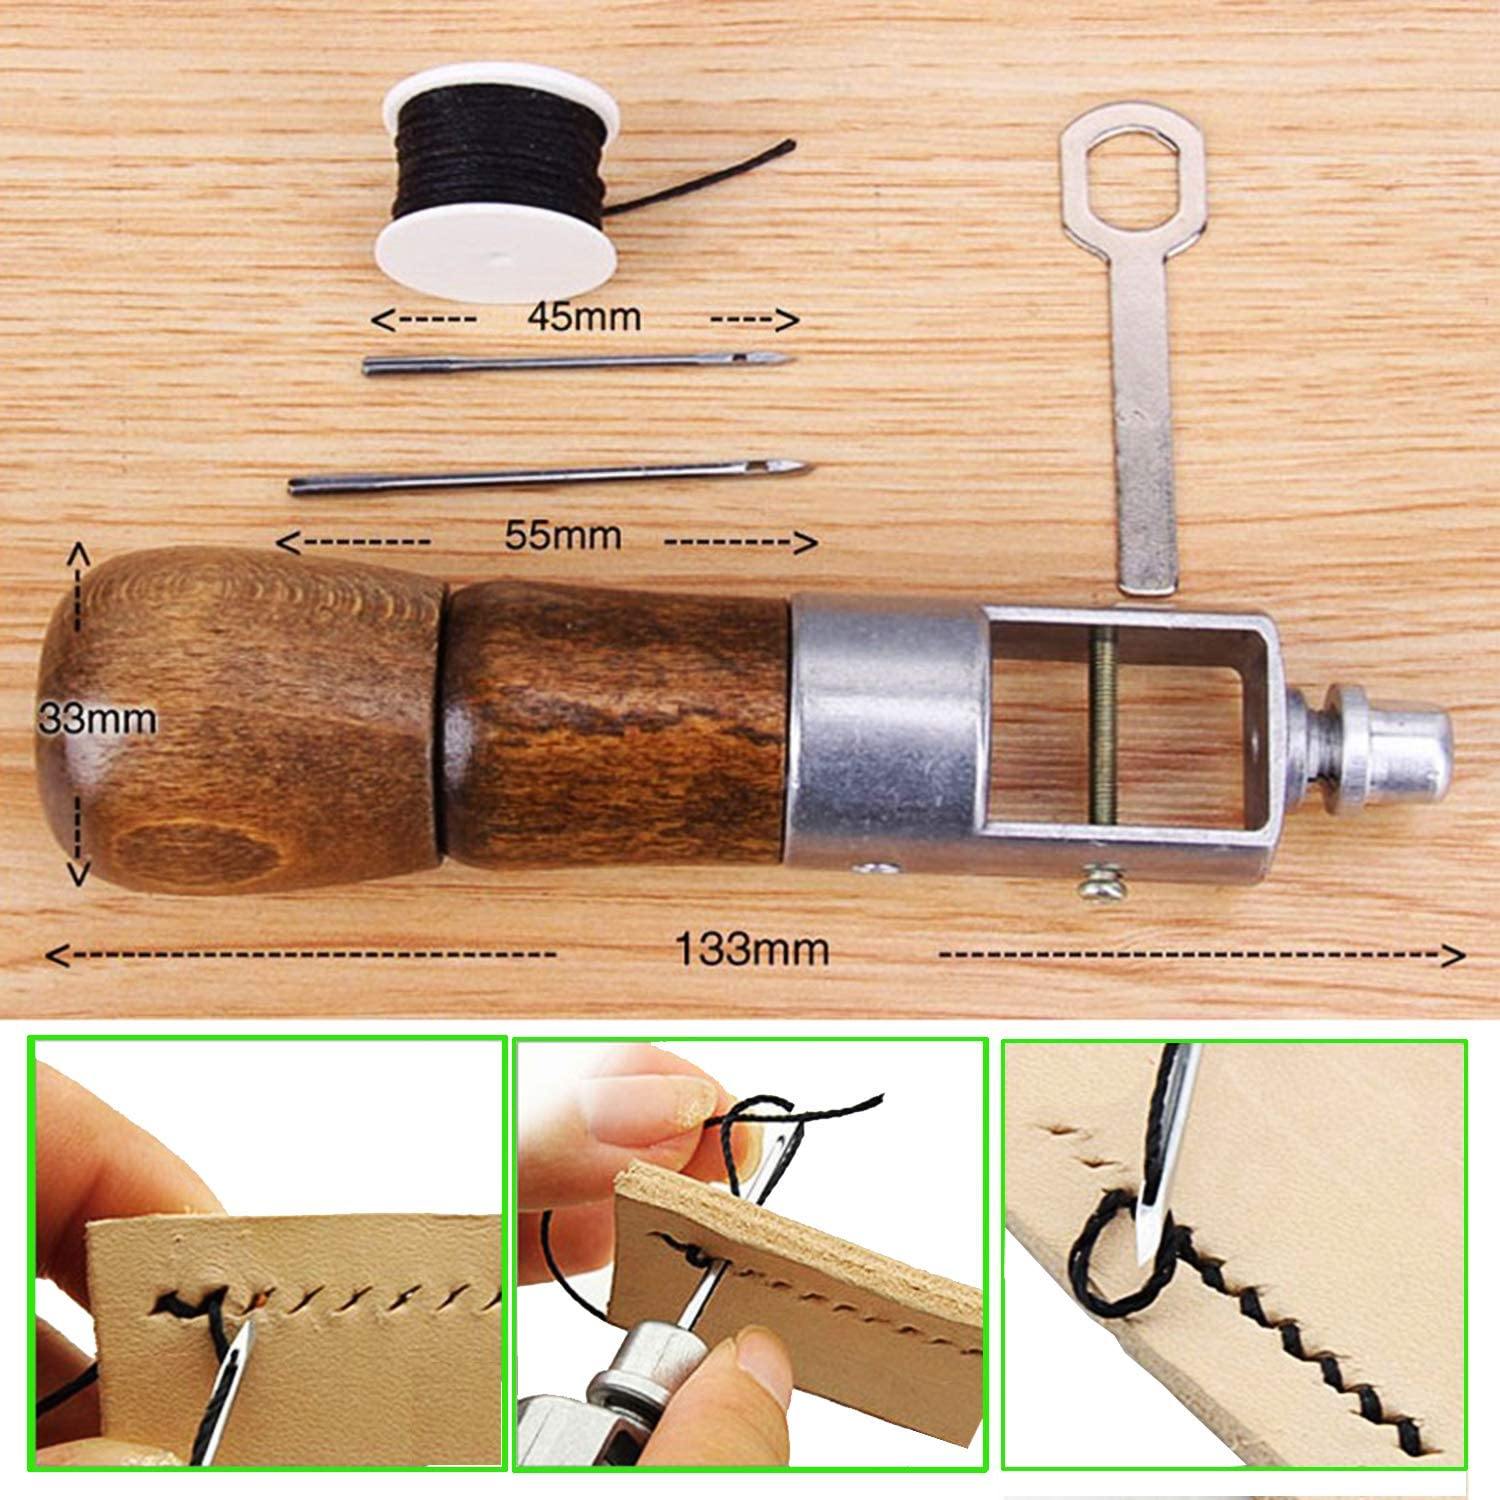 How To Use The Sewing Awl Kit On Leather 